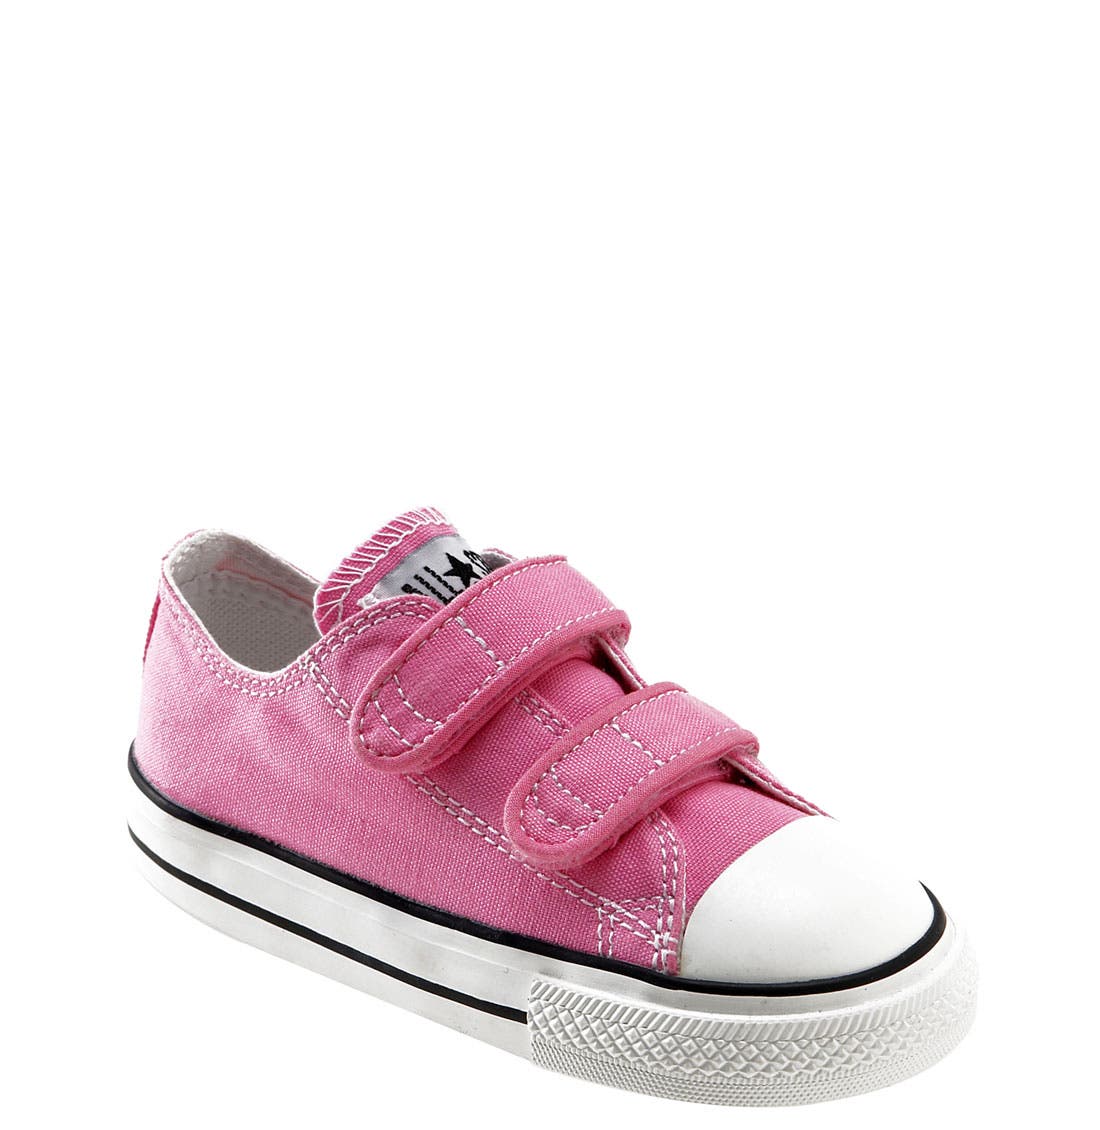 converse shoes for girls pink